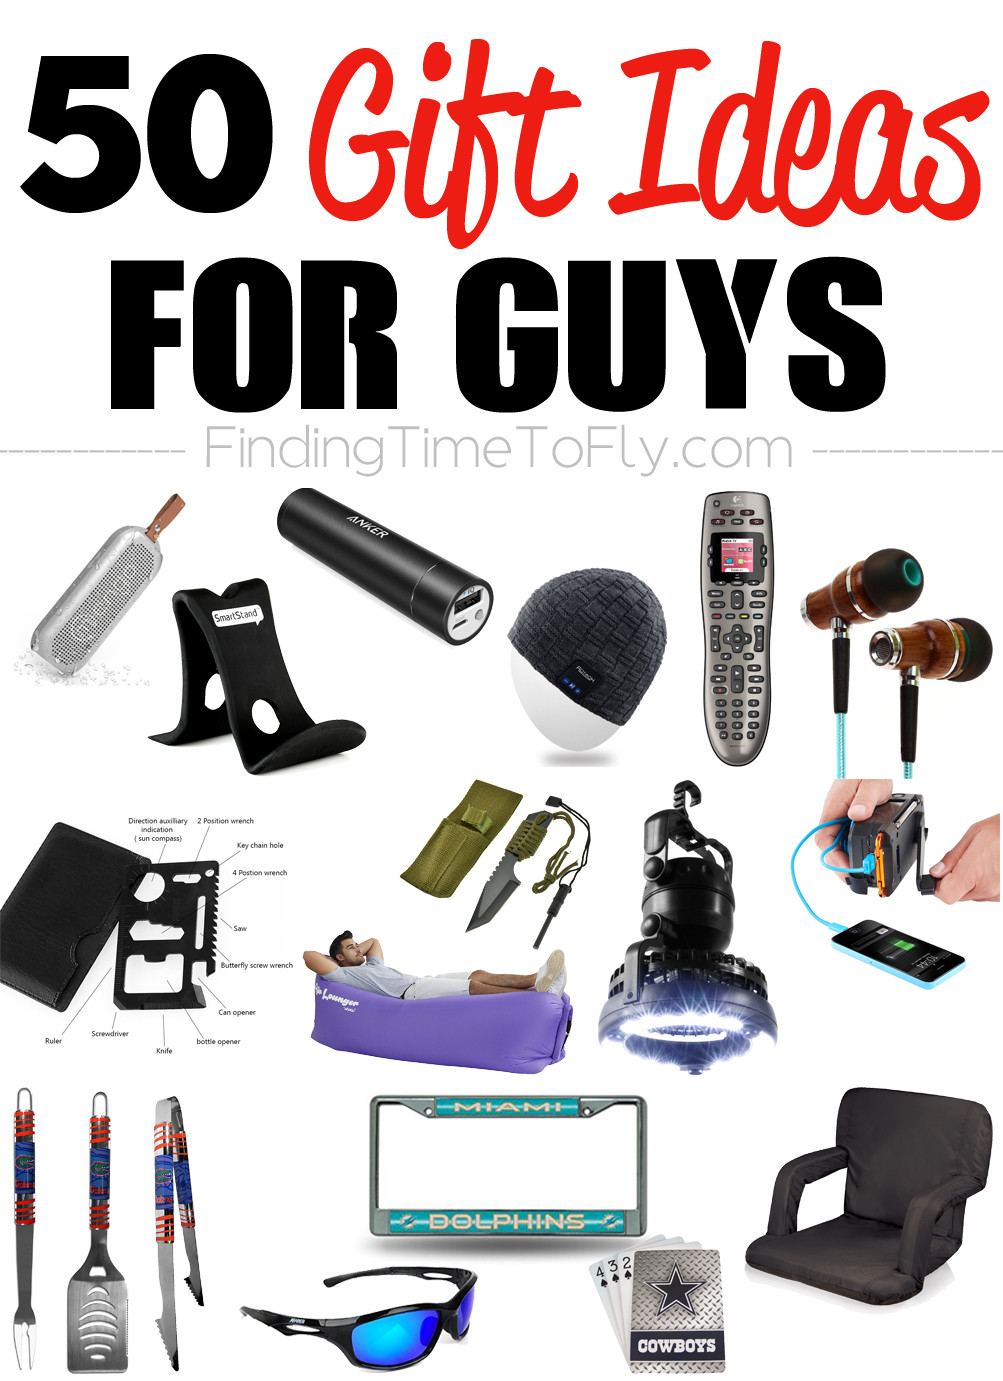 Graduation Gift Ideas For Men
 50 Gifts for Guys for Every Occasion Finding Time To Fly